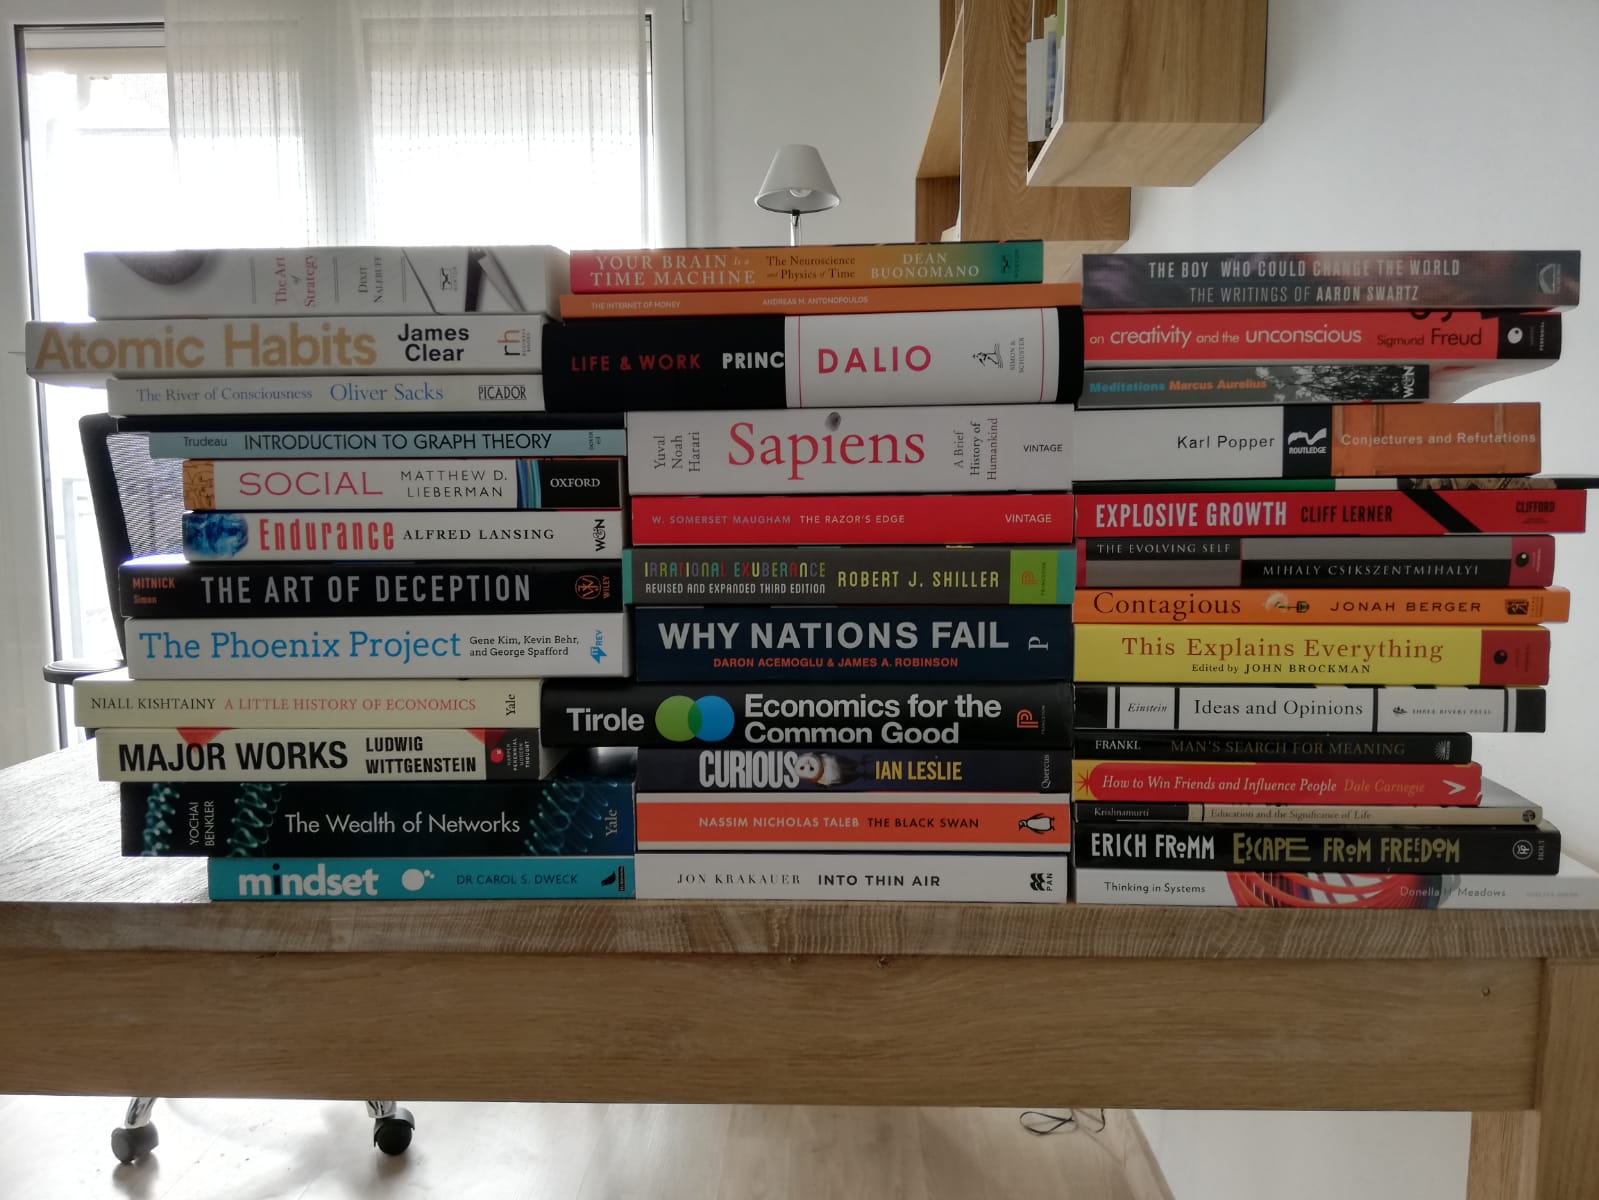 The 40+1 books that I intend to read in 2019 by reading every day